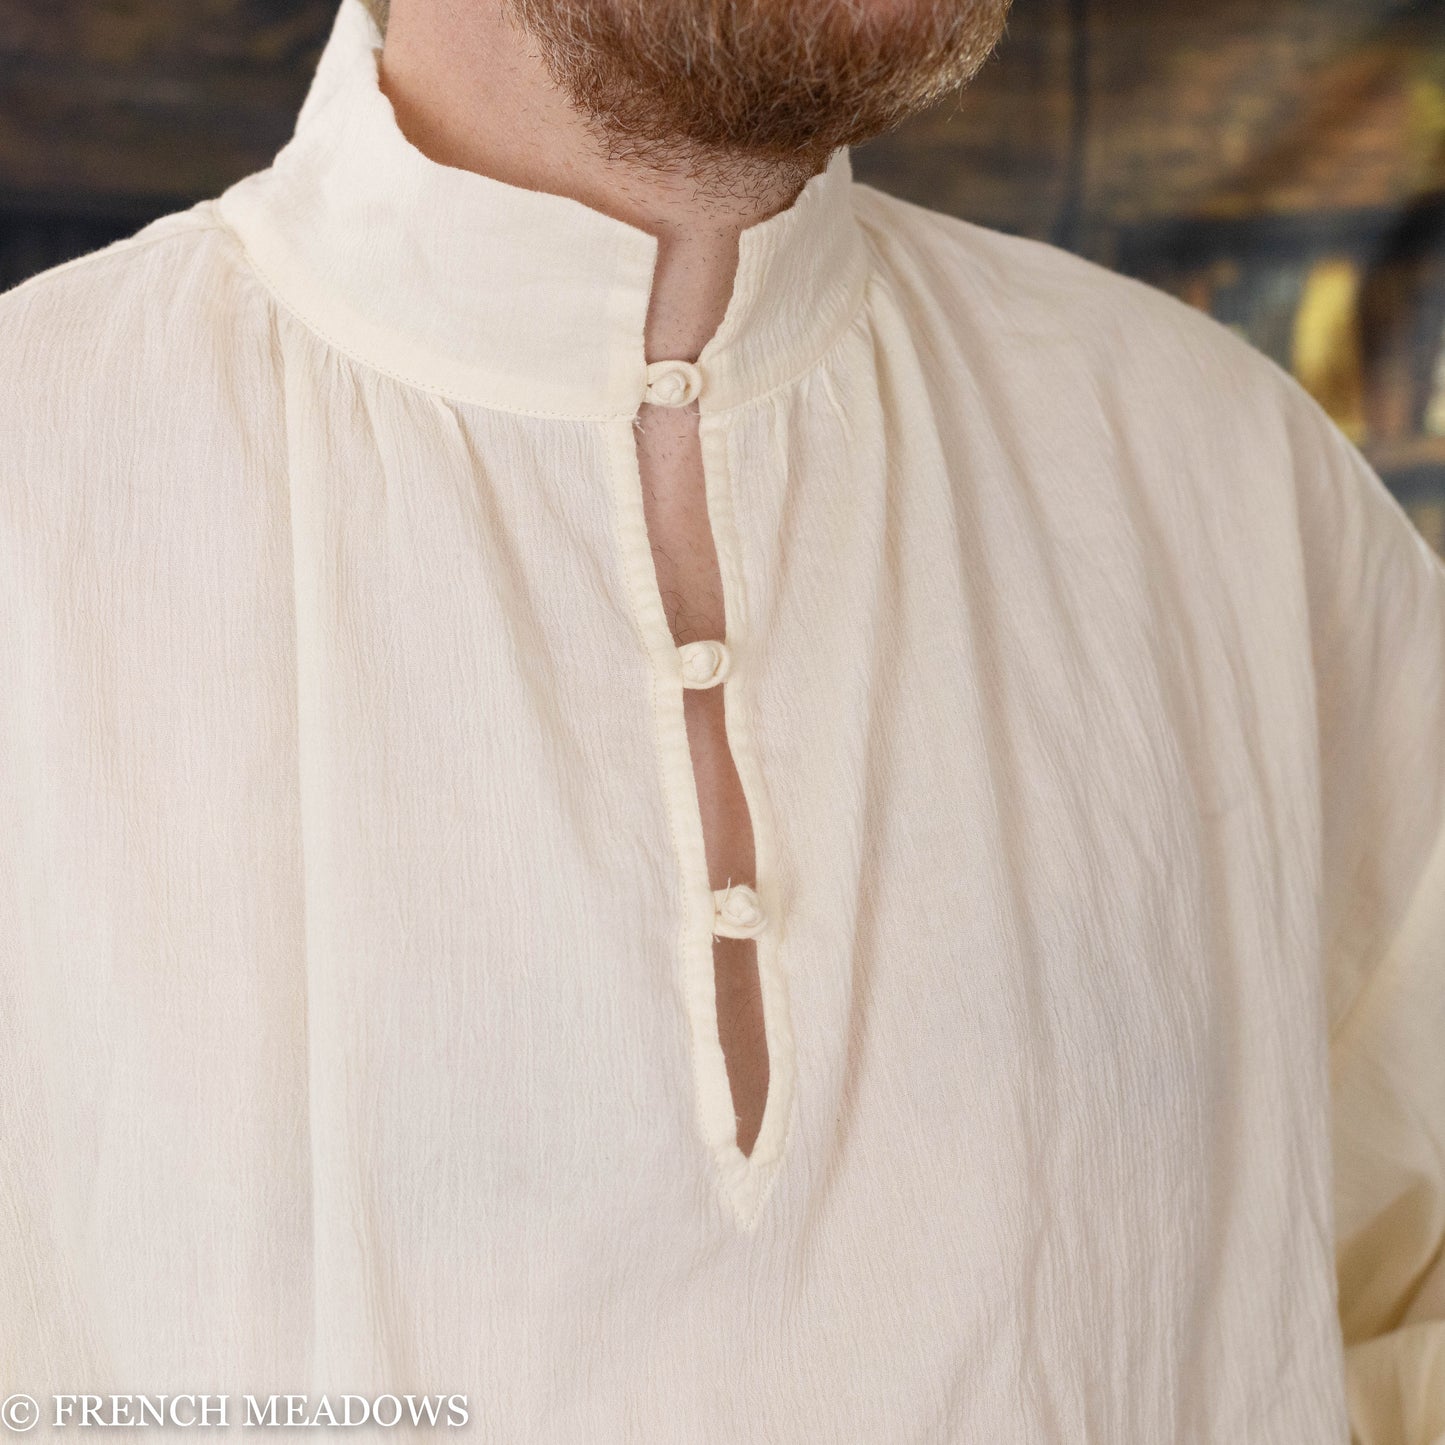 Load image into Gallery viewer, neckline detail on mens white tunic shirt
